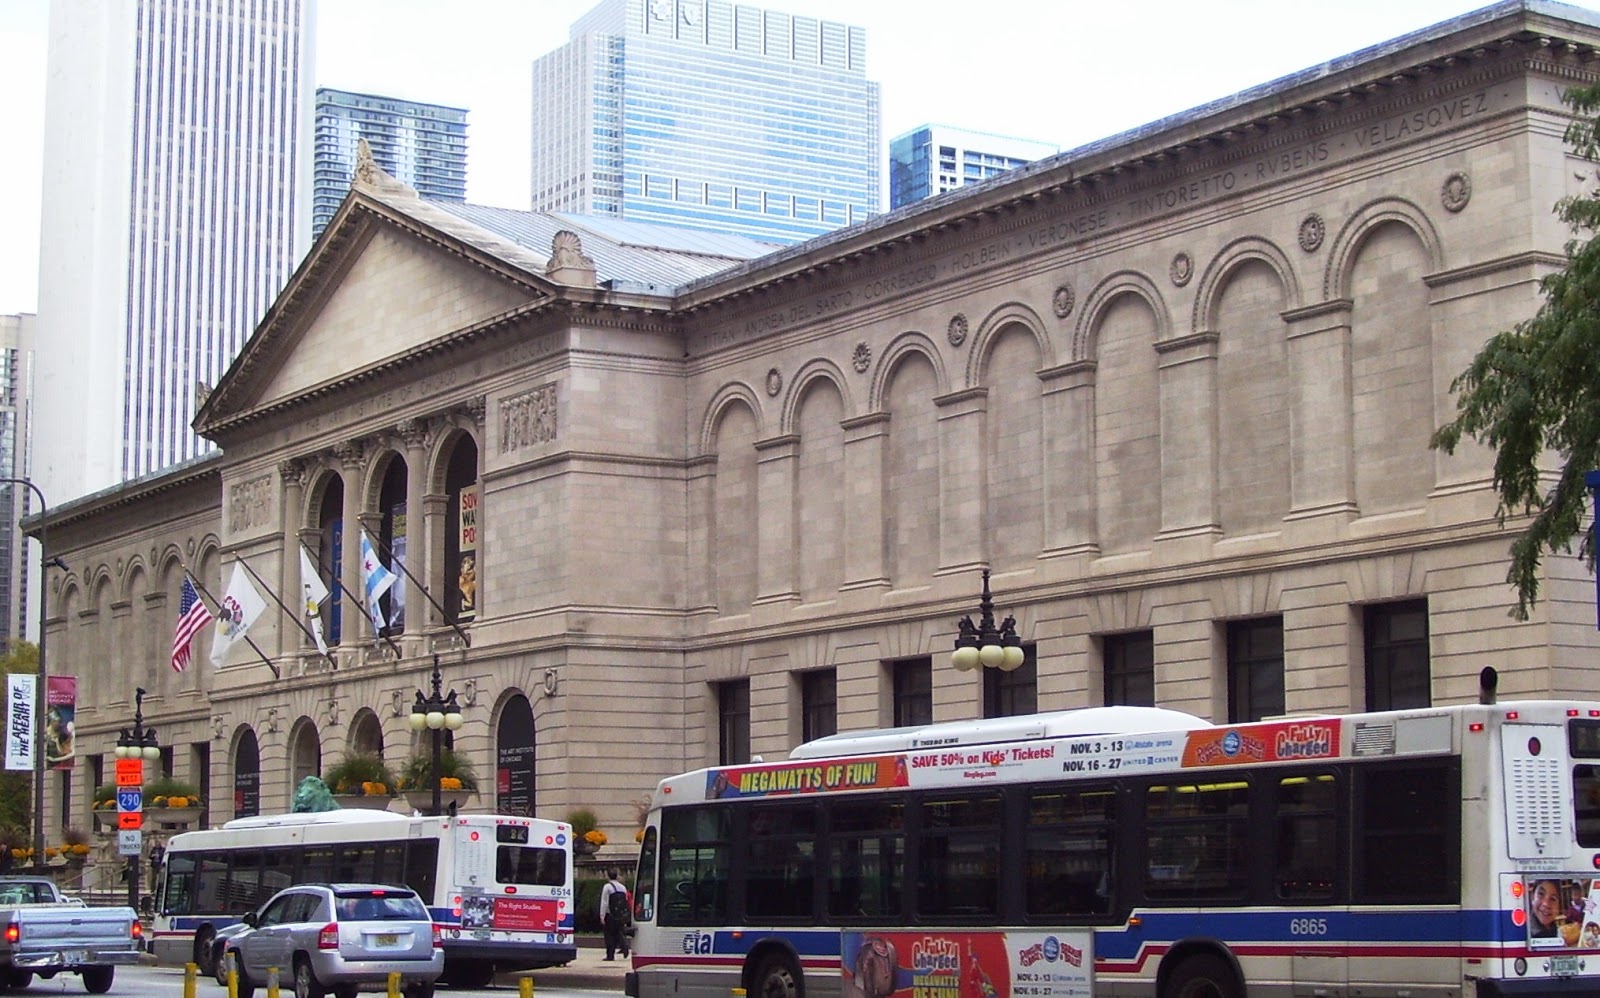 THE ART INSTITUTE OF CHICAGO, USA